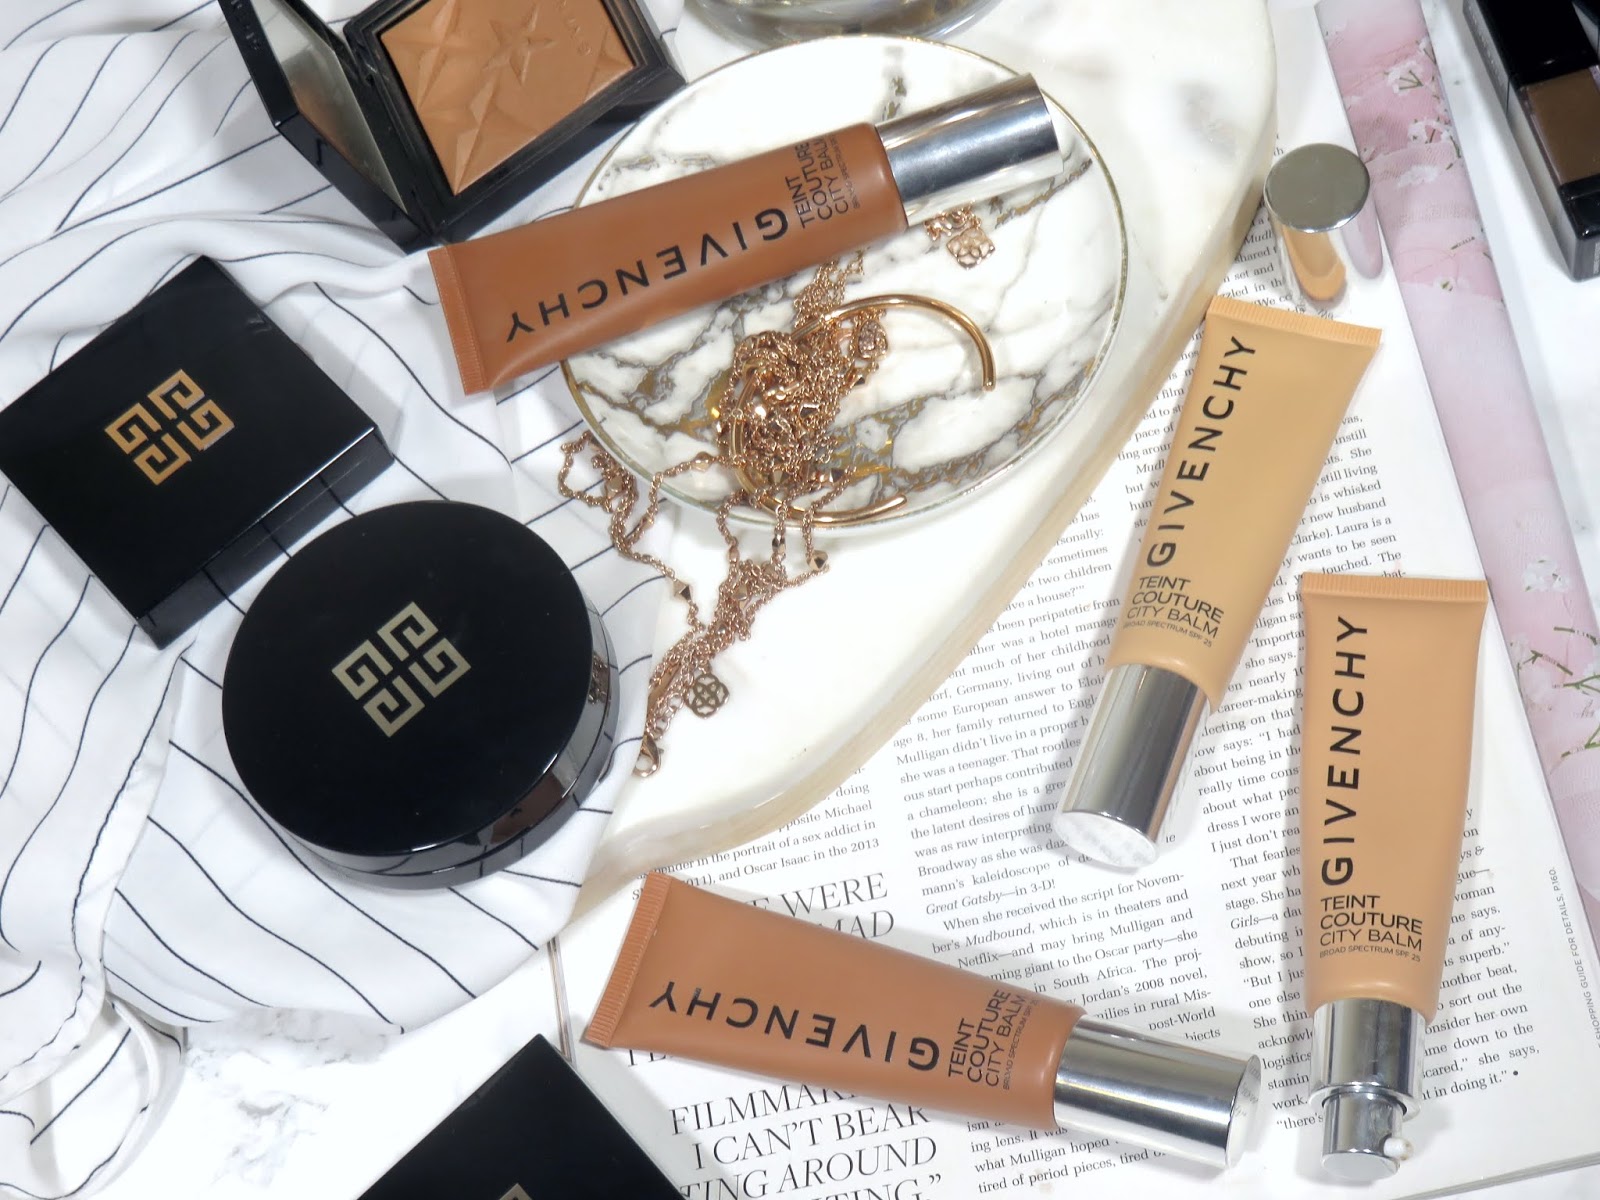 Givenchy Teint Couture City Balm Radiant Perfecting Skin Tint SPF 25 Review and Swatches